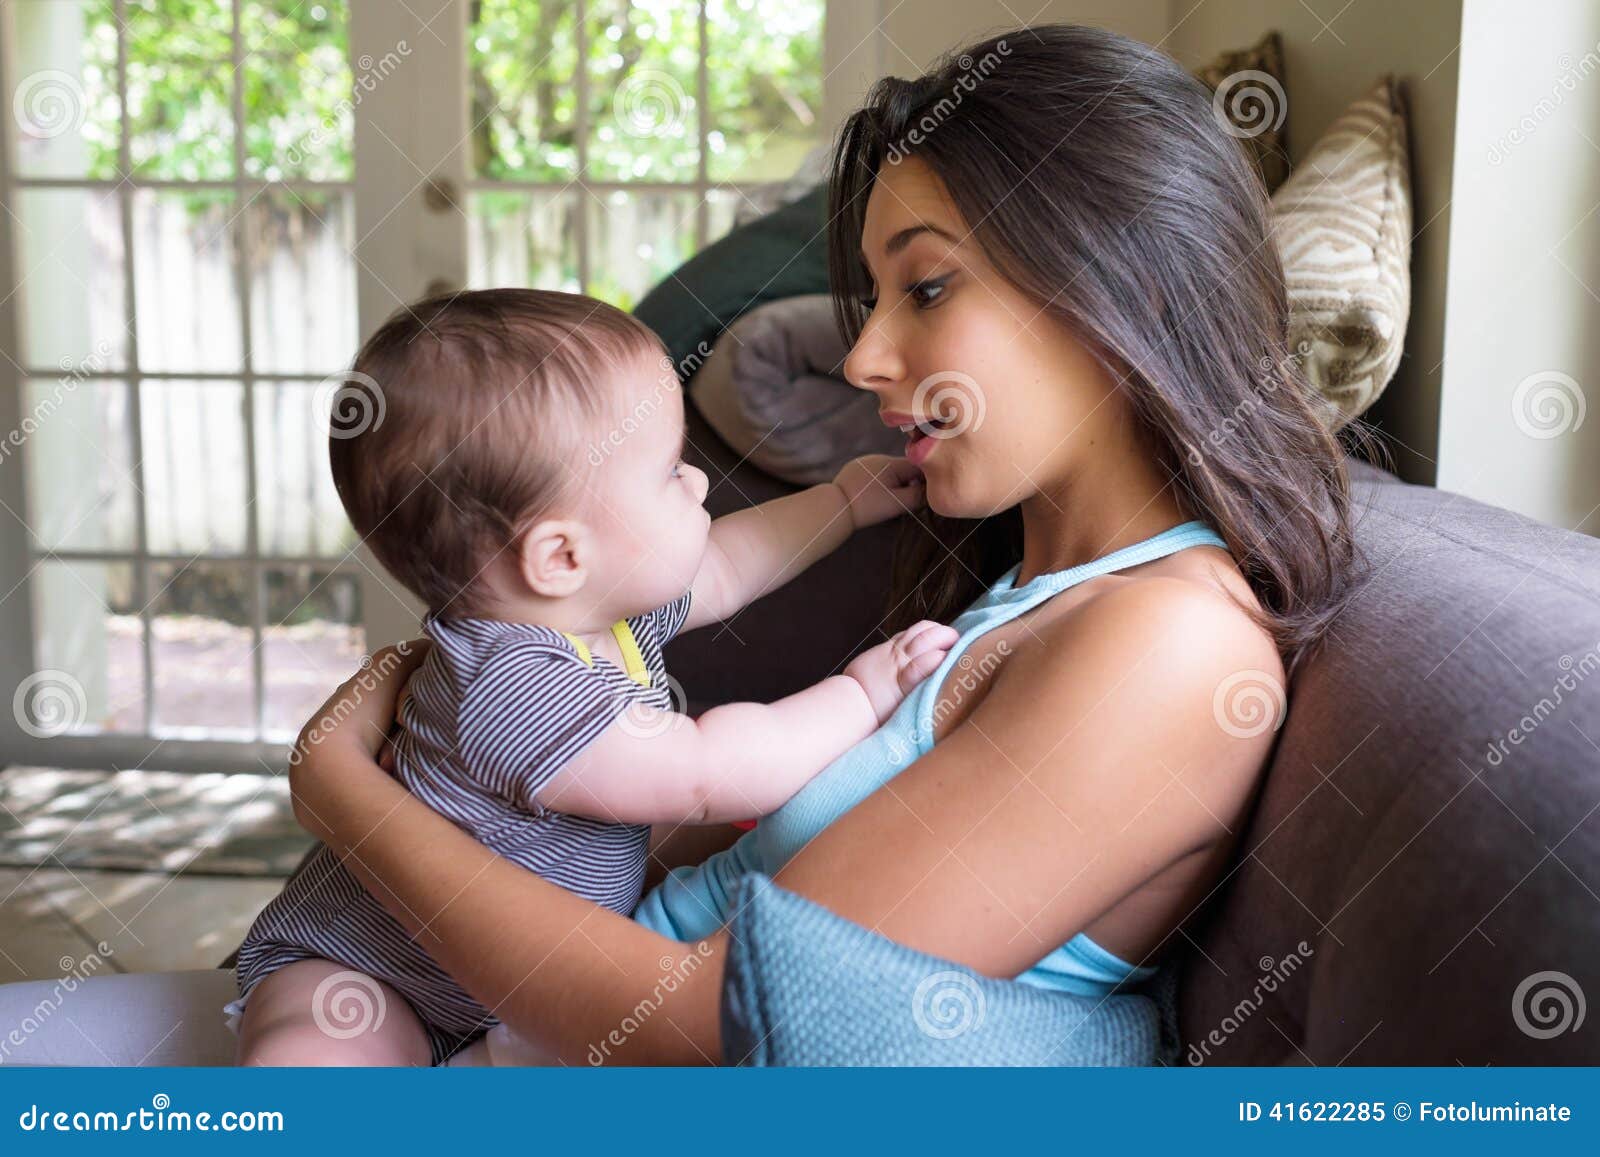 Baby love stock image. Image of family, attractive, child - 41622285